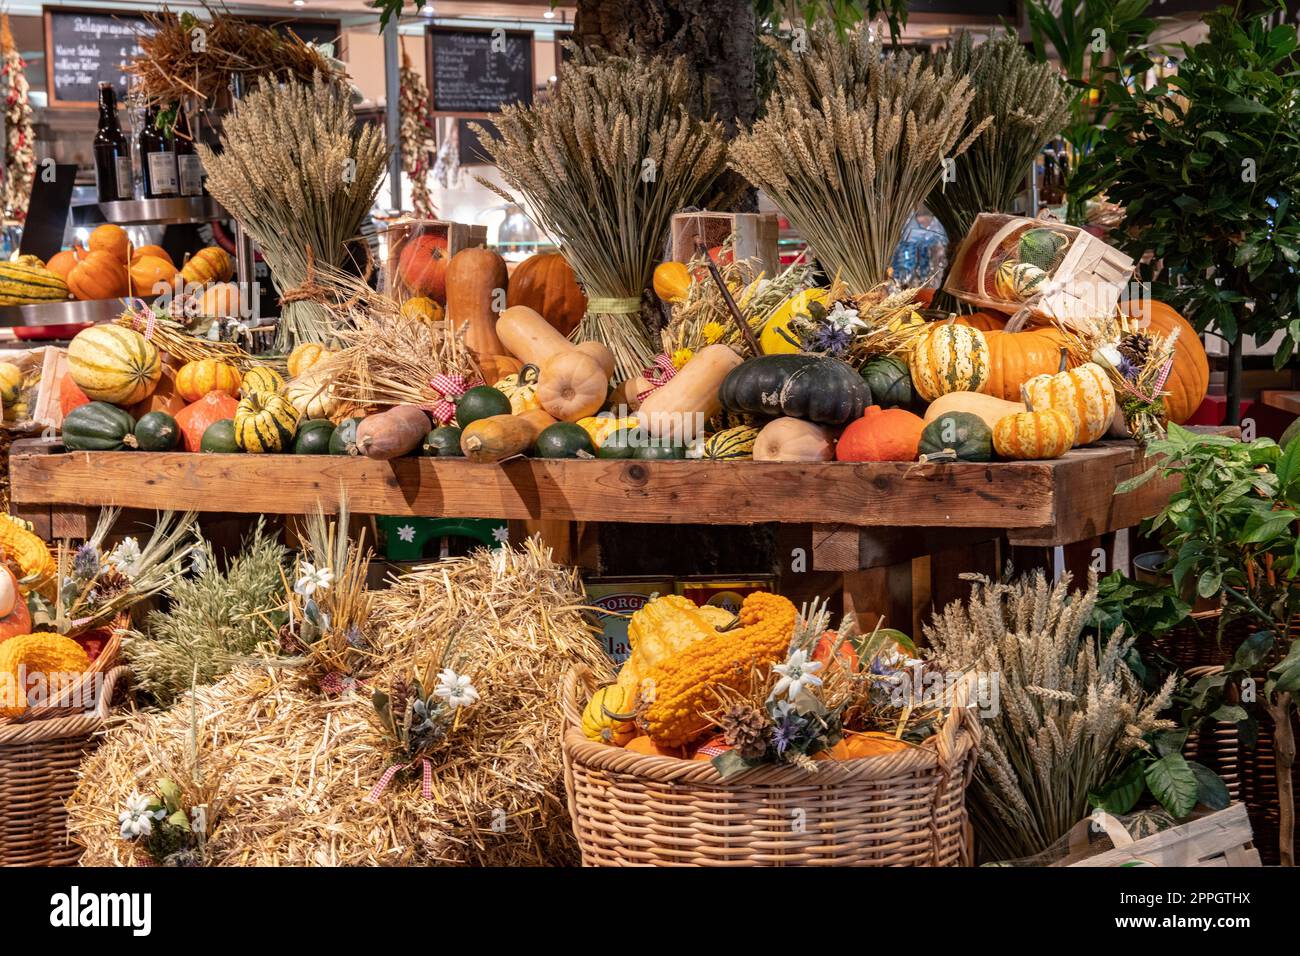 Thanksgiving autumn decorations. Colourful assortment of different kinds of pumpkins, gourds and squashes on wooden shelves and straw bales at a harvest market. Stock Photo